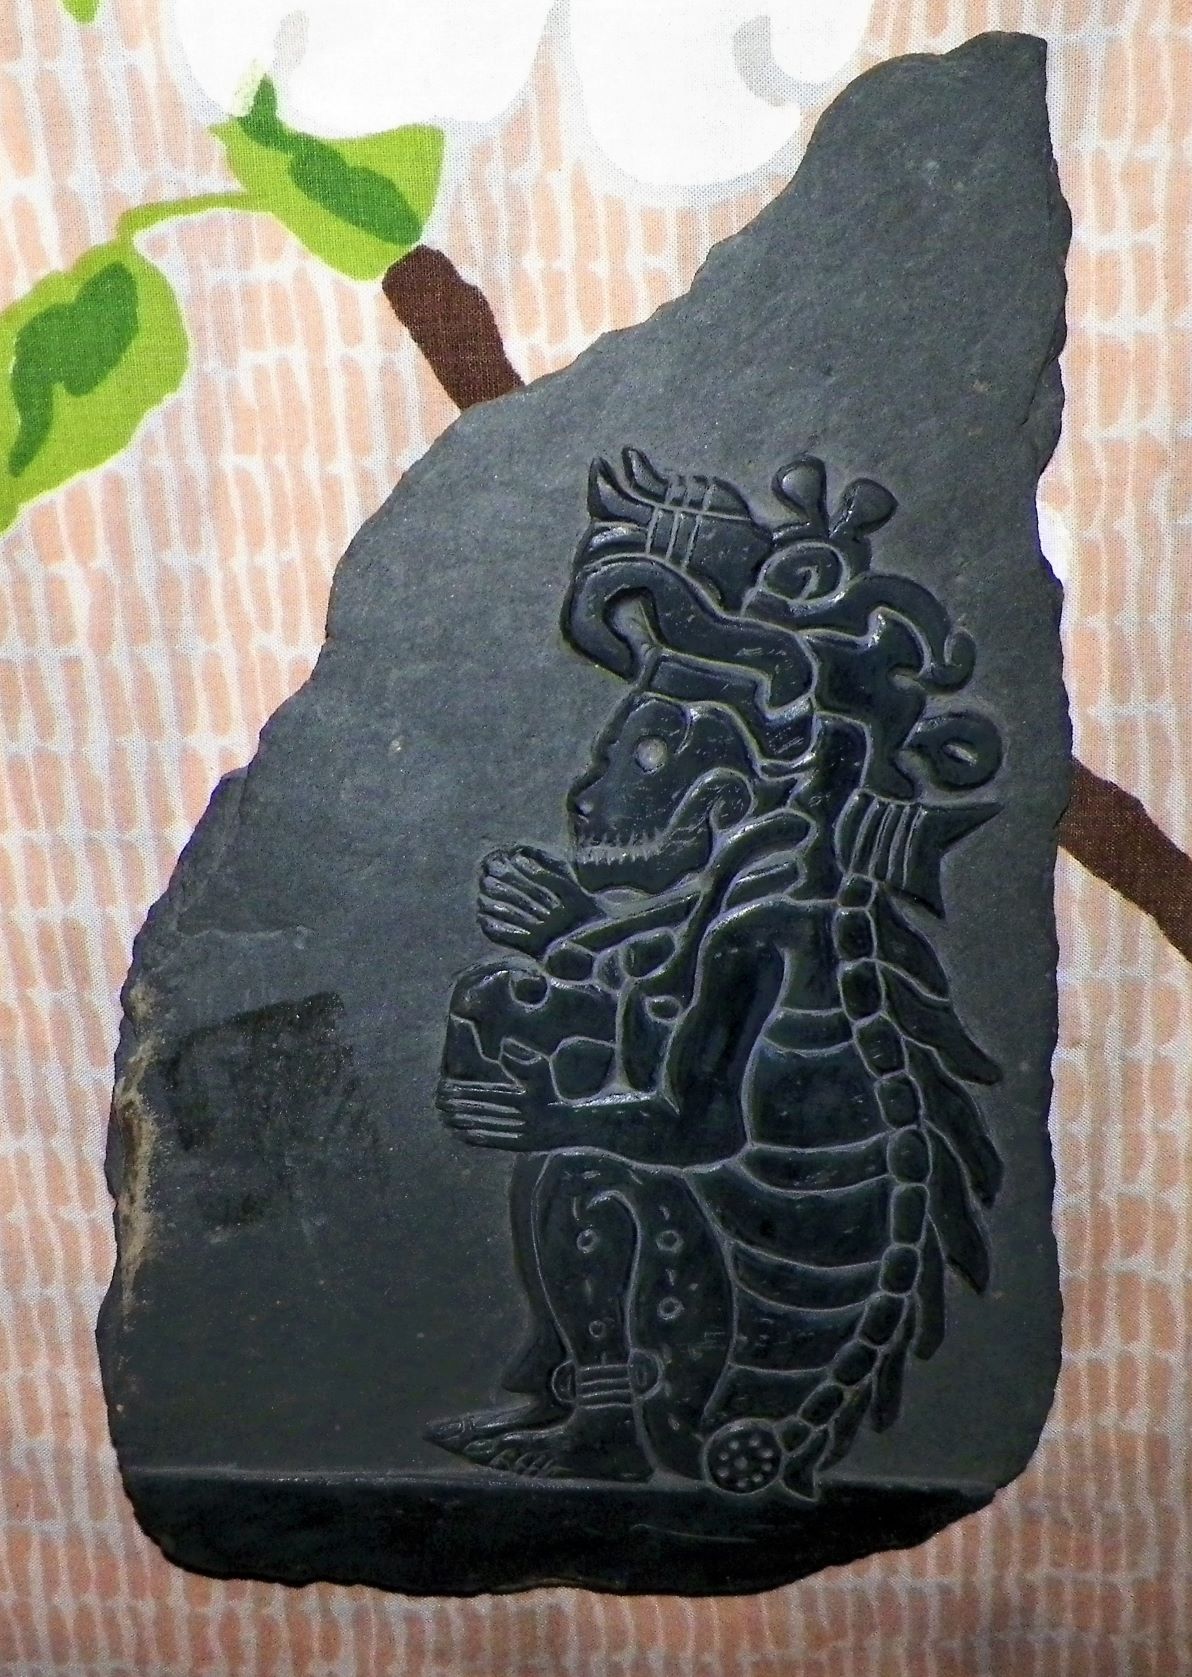 ART FOSSIL STONE ETCHING 1A.JPG